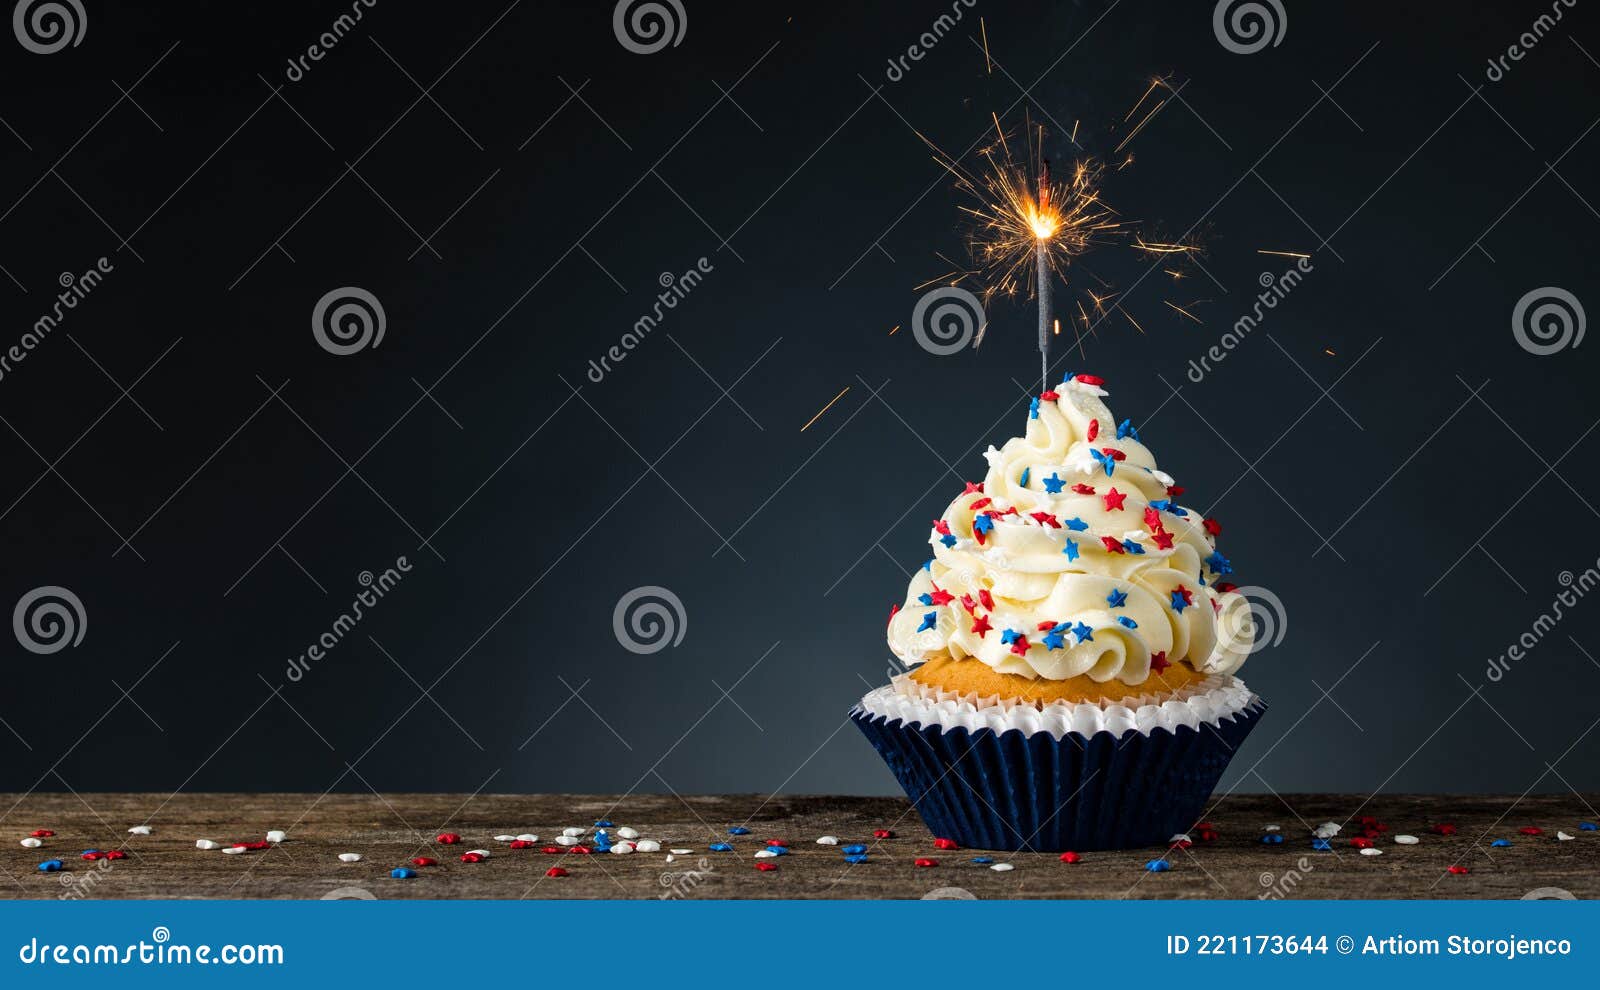 birthday cupcake american style. sparkler light burning in a cake. 4th of july, independence, memorial or presidents day. tasty cu